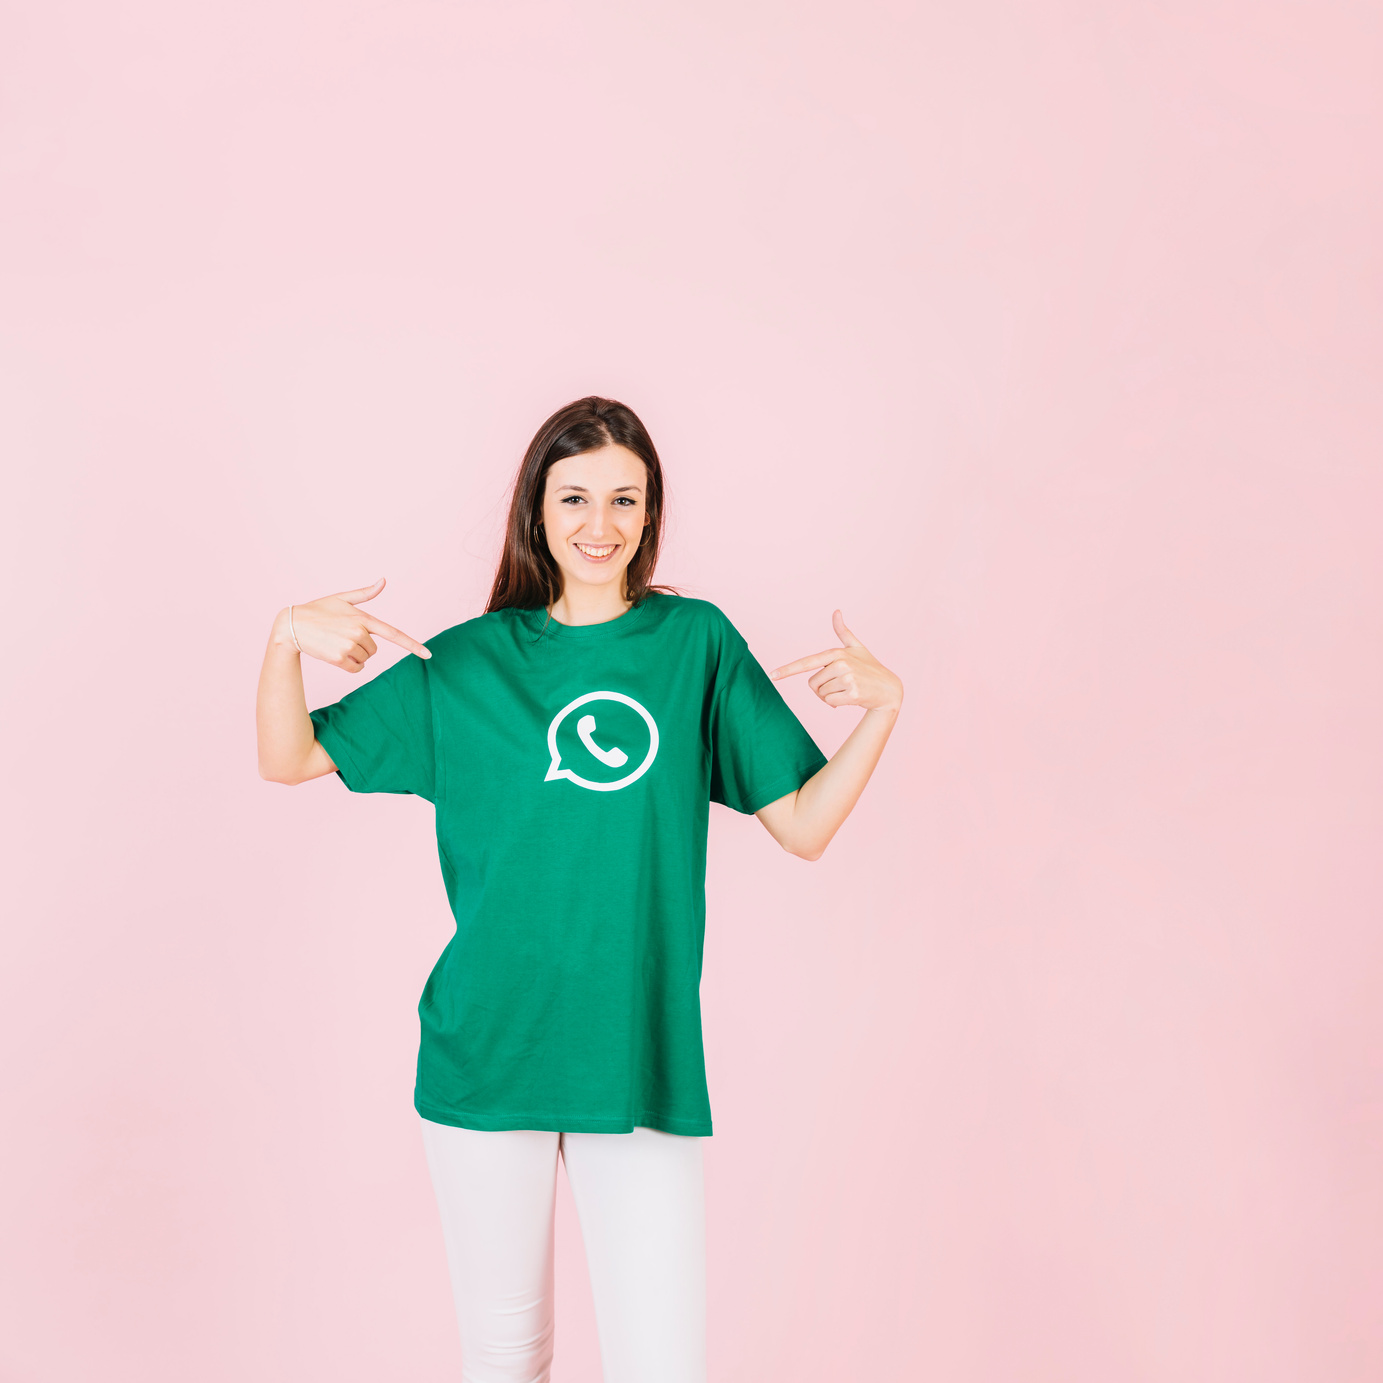 portrait smiling woman pointing her t shirt with whatsapp ic